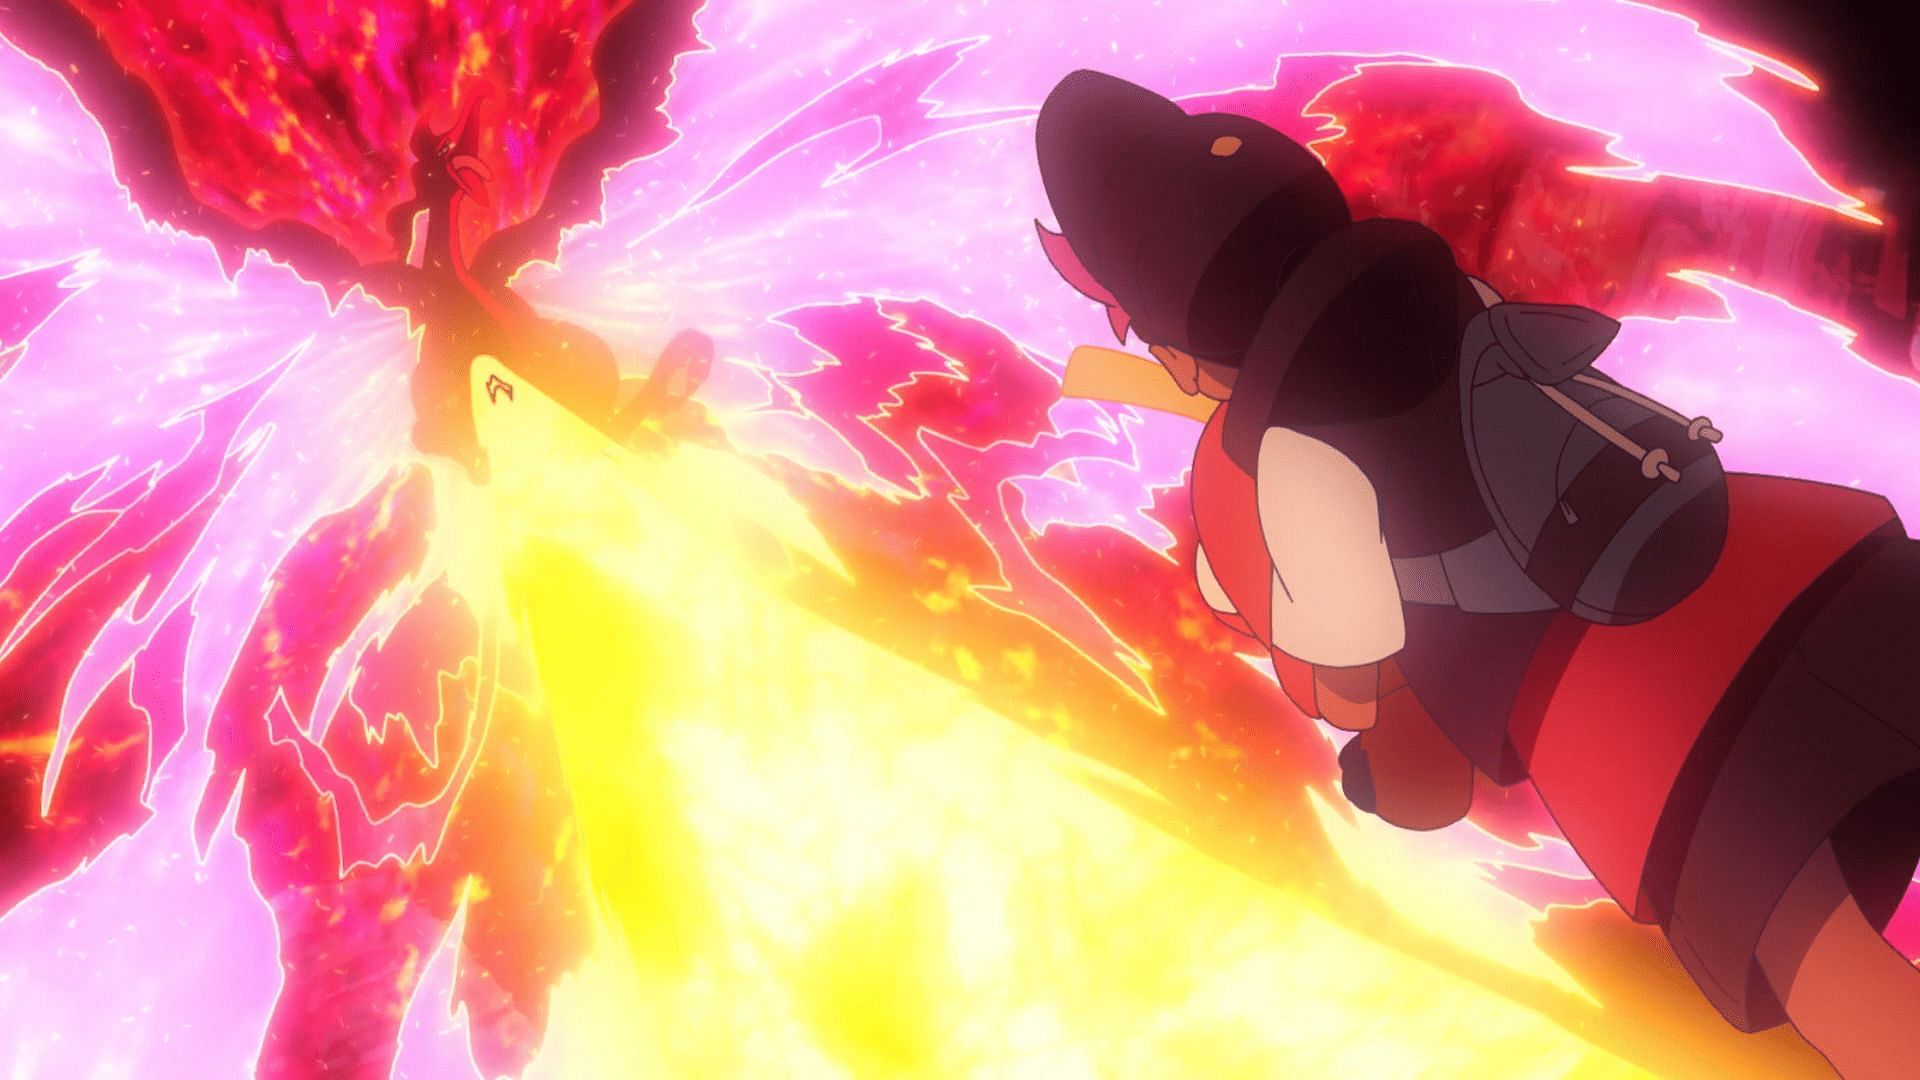 Galarian Moltres may have been the most dangerous obstacle in Pokemon Horizons so far (Image via The Pokemon Company)